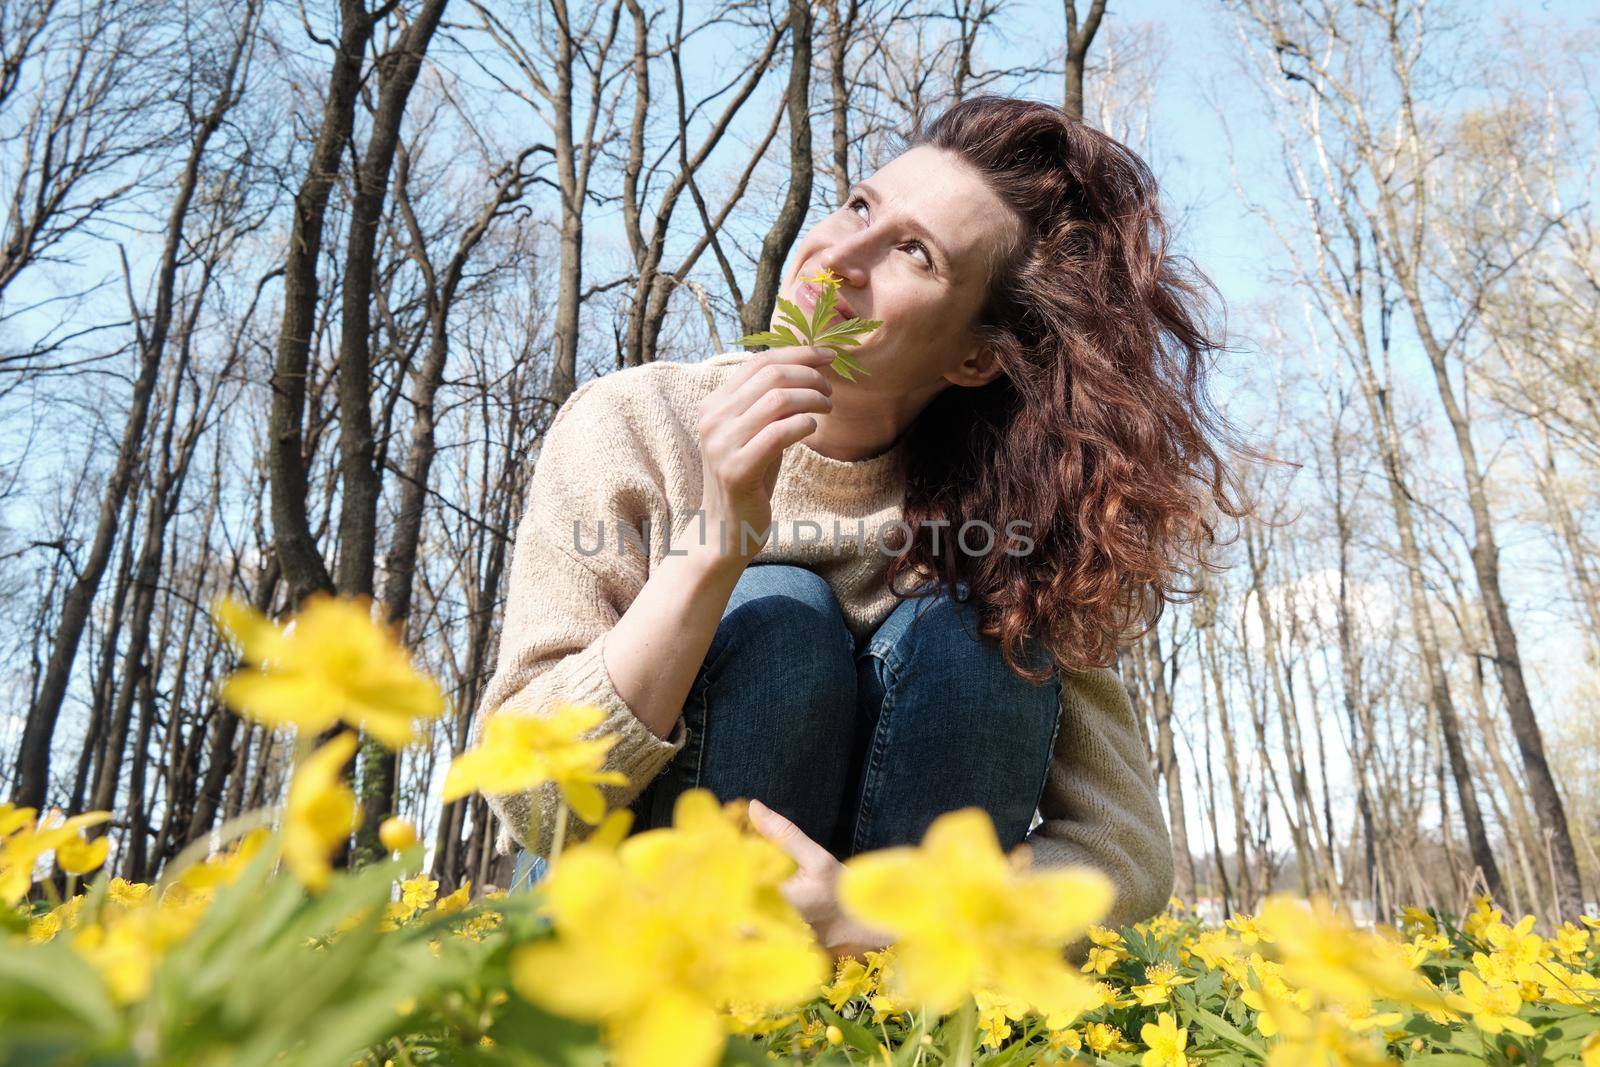 Woman enjoying smell of spring flowers. Smiling woman among spring flowers.